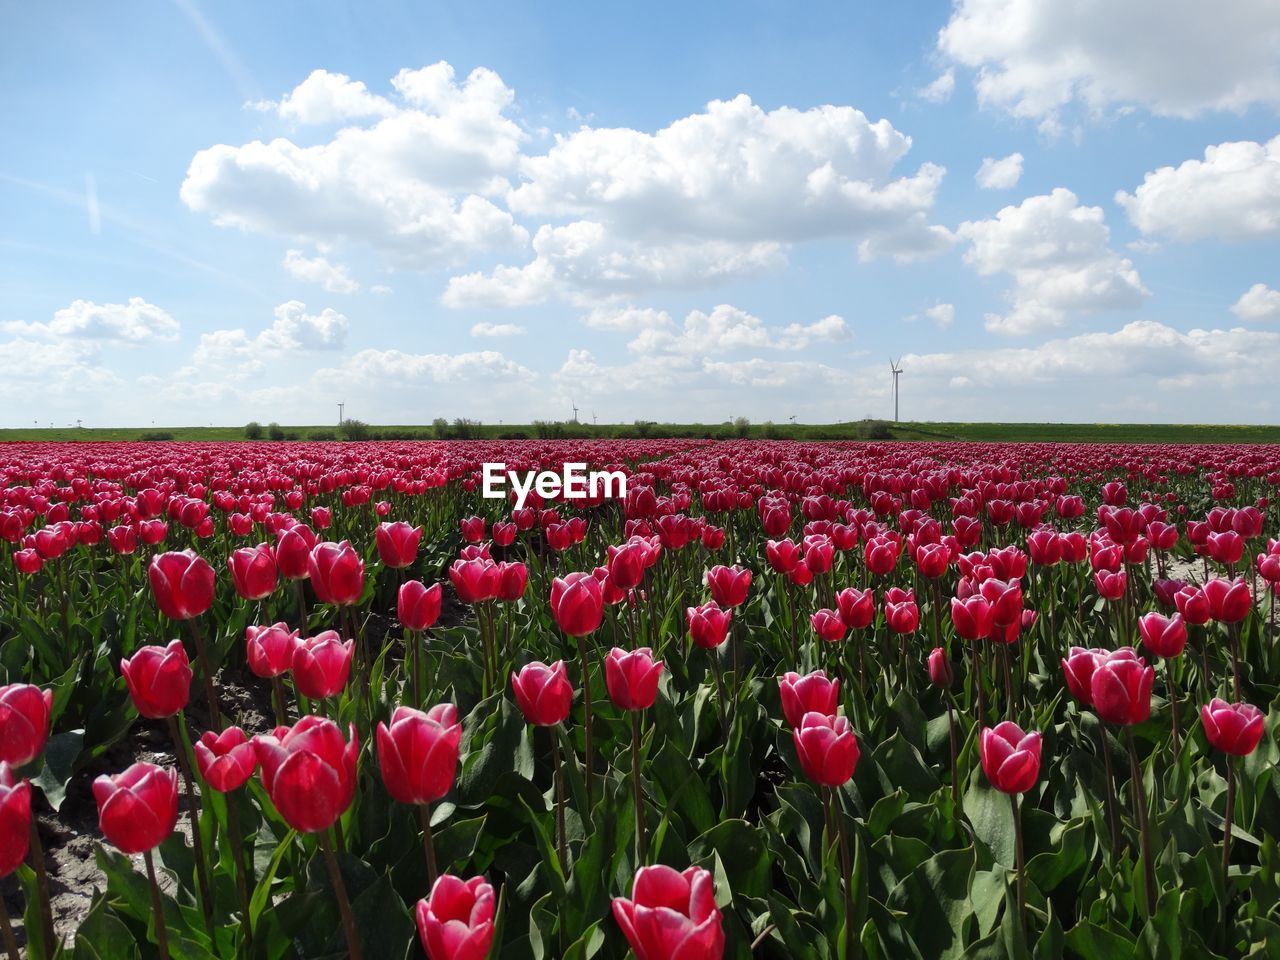 Red tulips blooming in field